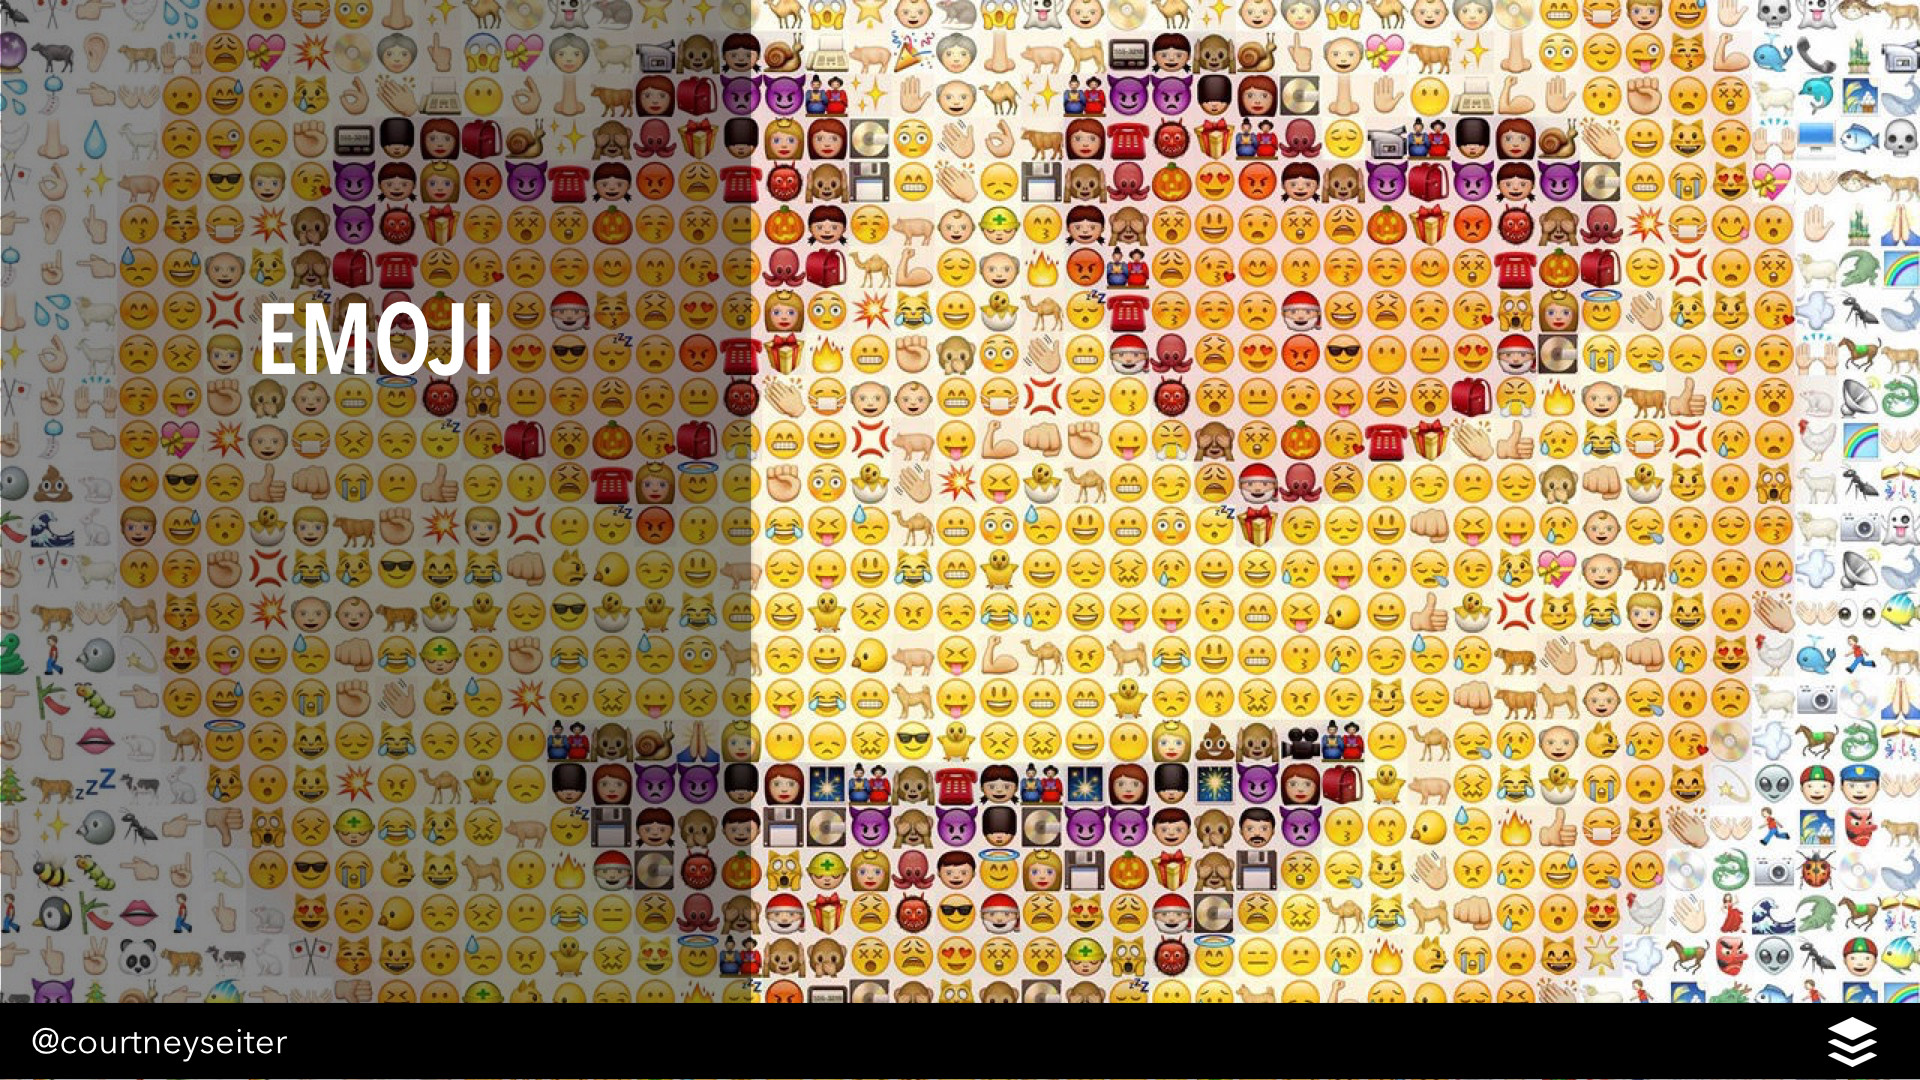 1920x1080 High Definition Wallpapers: Cute Emoji Wallpaper On Computers .